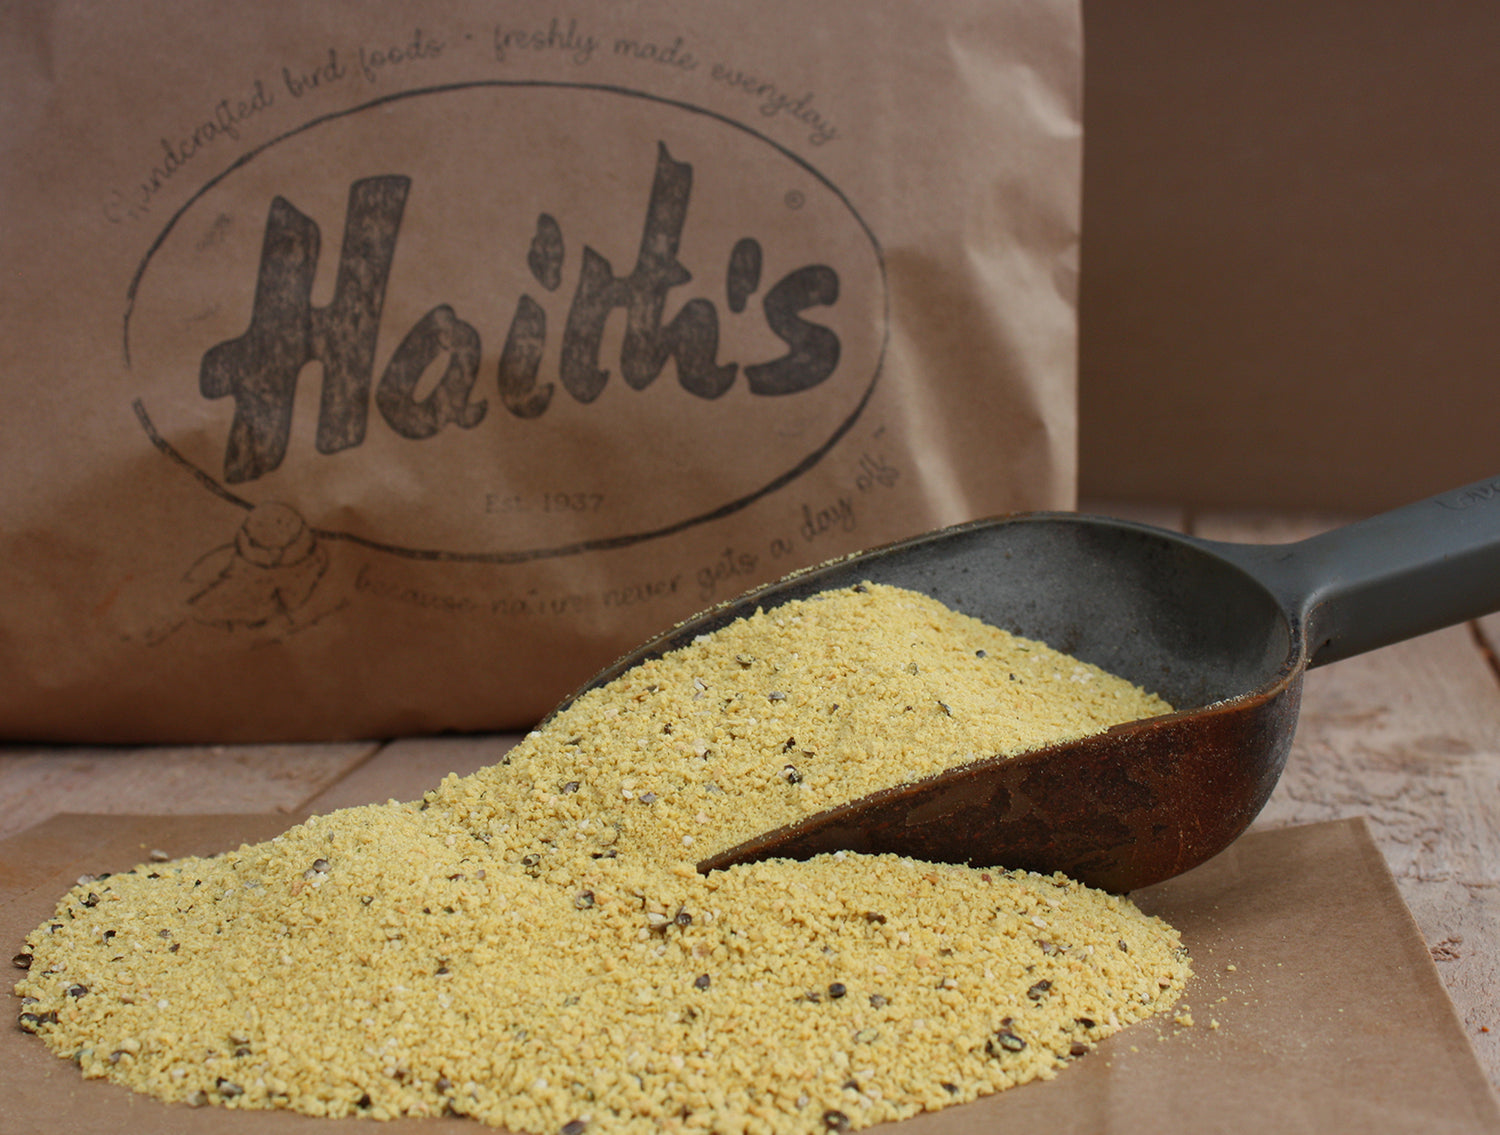 Haith's red factor ingredient inside a scoop consisting of a yellow colour, in front of a Haith's paper bag 